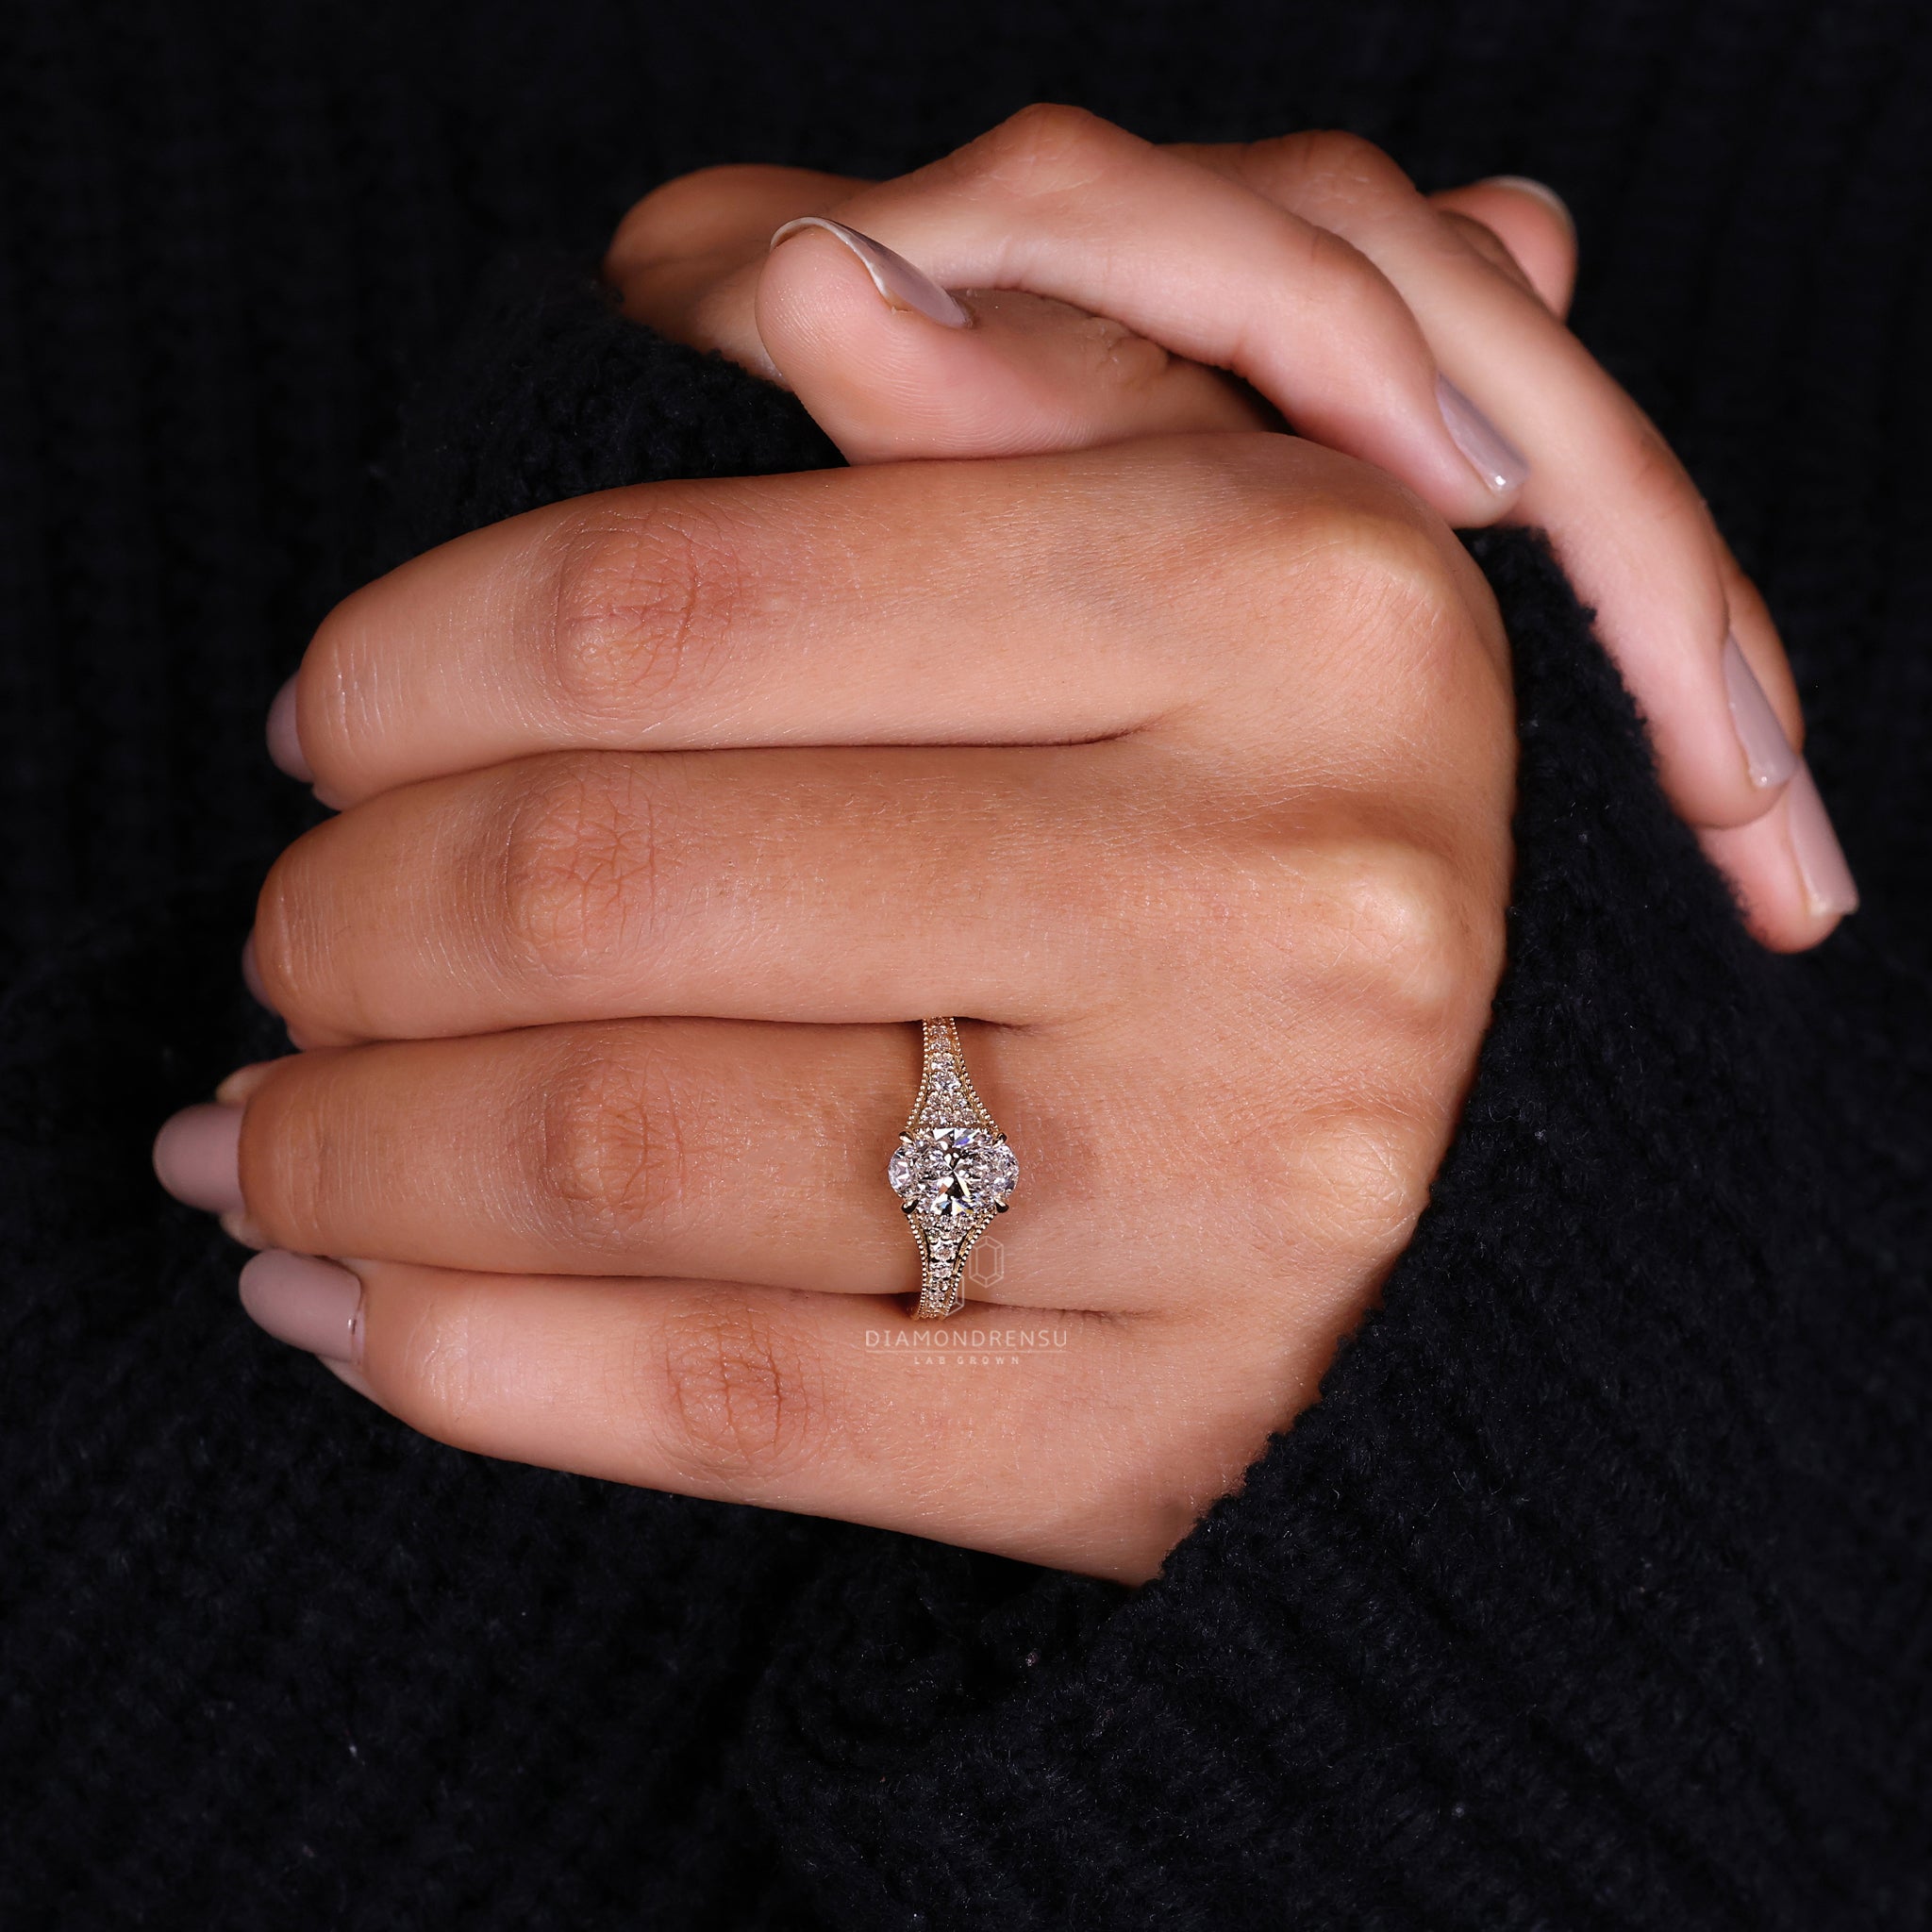 Graceful Oval Diamond Ring on Hand, radiating beauty and grace